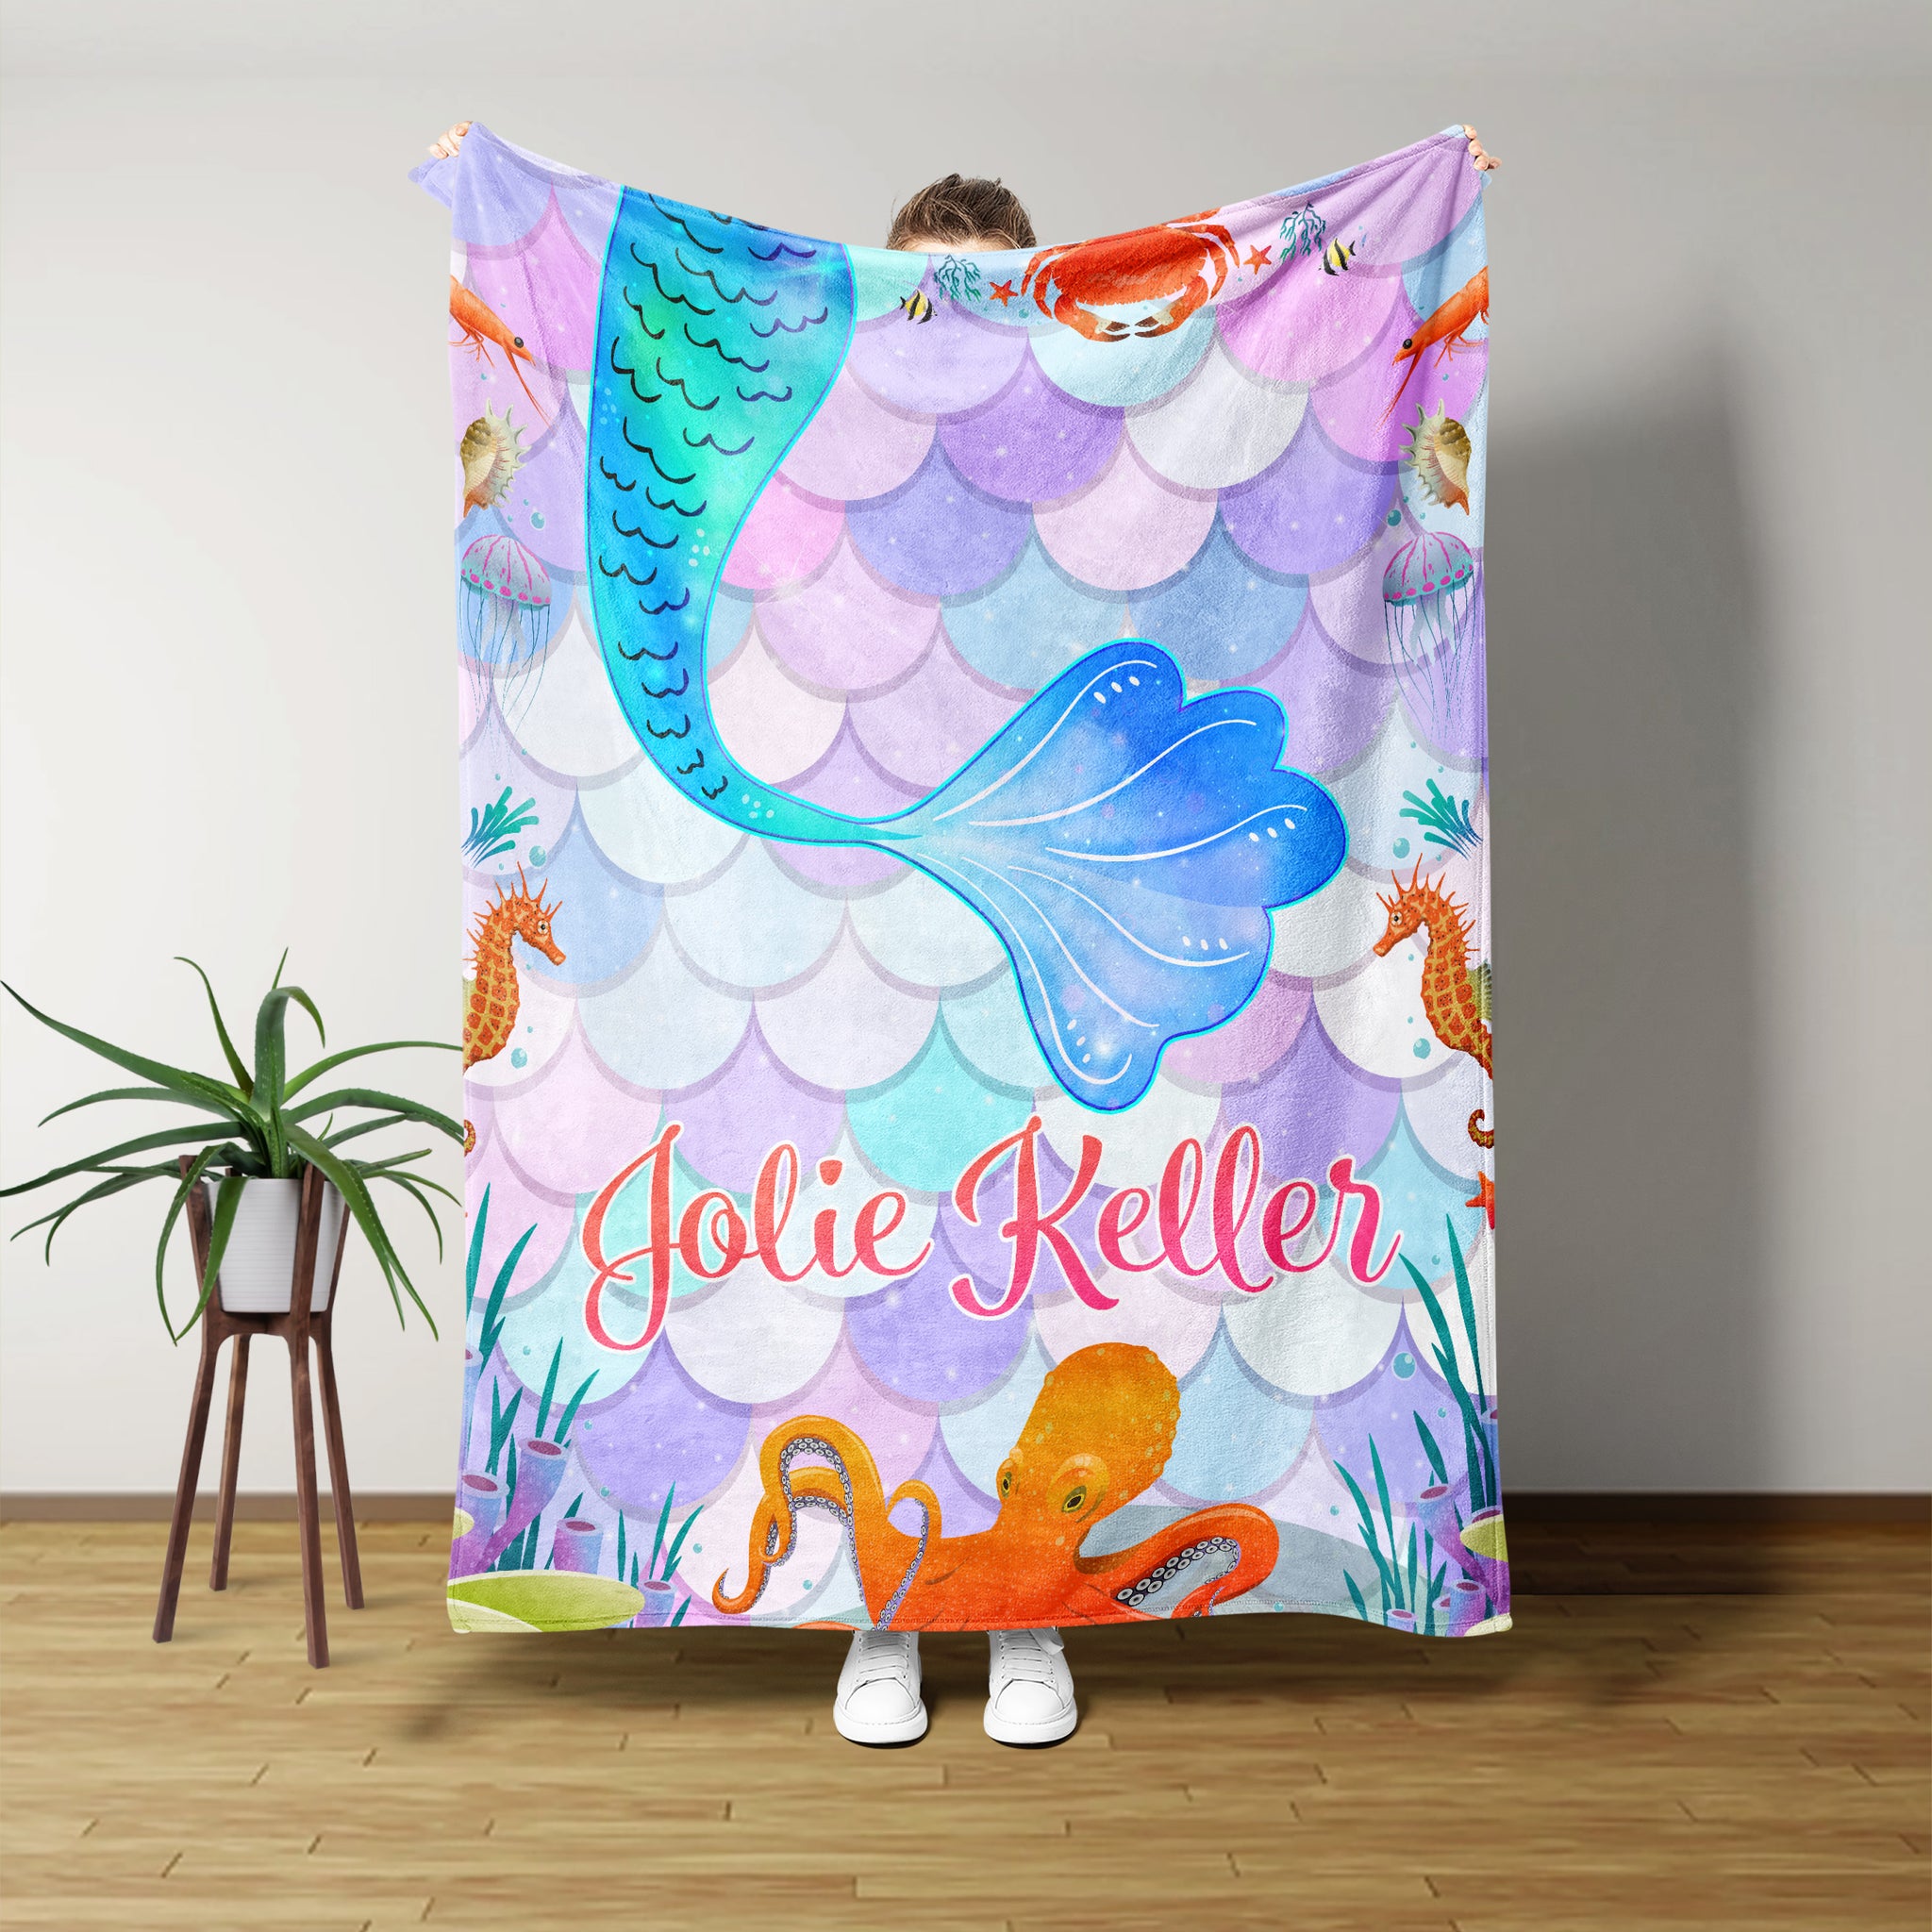 Personalized Name Blanket, Sea Life Blanket, Marine Life Blanket, Baby Blanket, Ocean Theme Baby Blanket, Sea Creature Blanket, Blanket For Girls, Sea Life Lover Gift